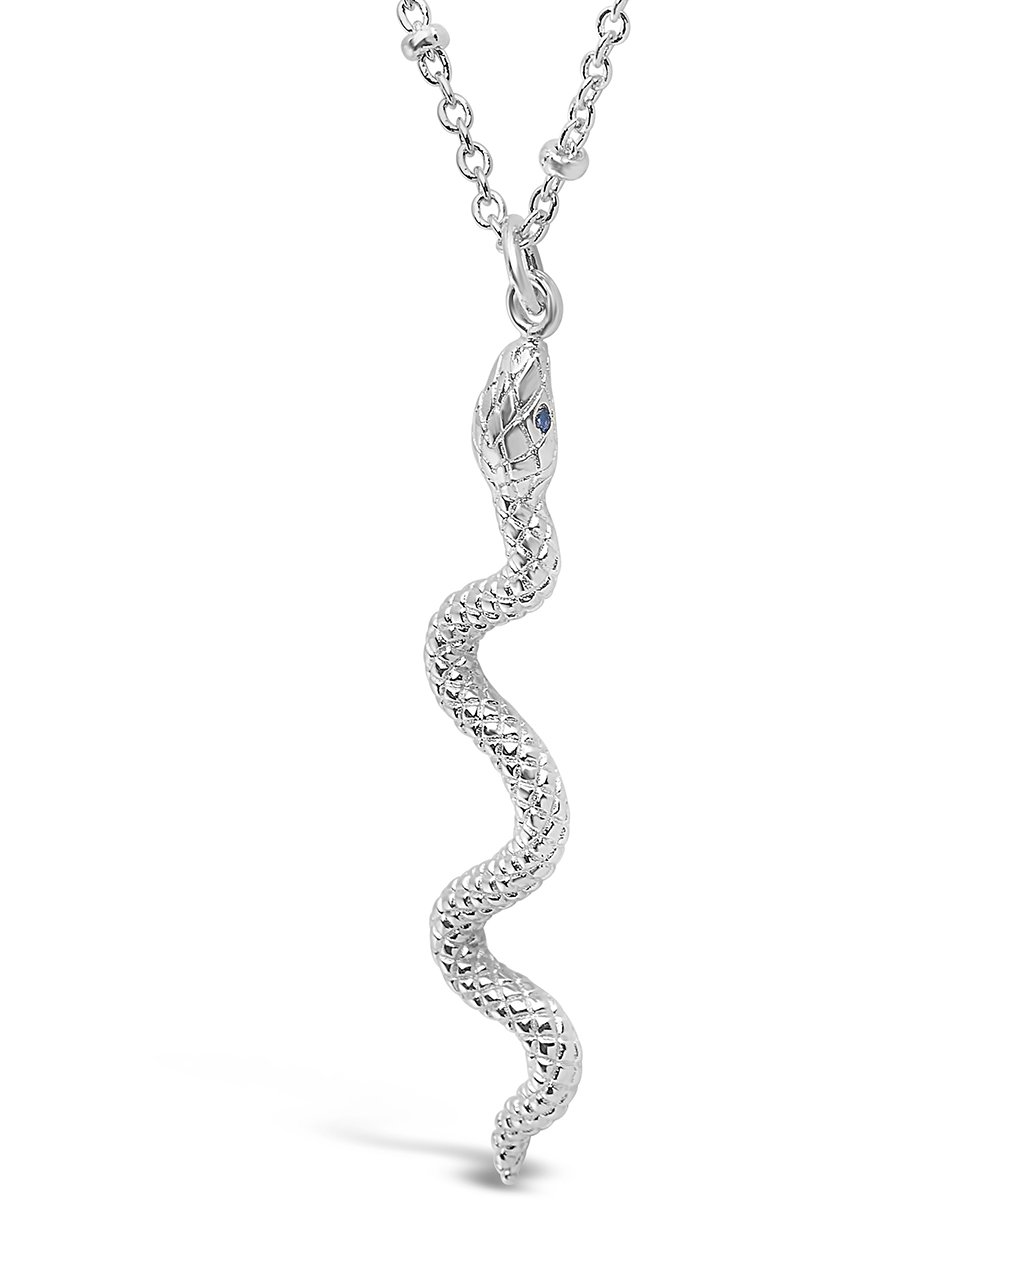 Scaly Snake Pendant Necklace - Sterling Forever